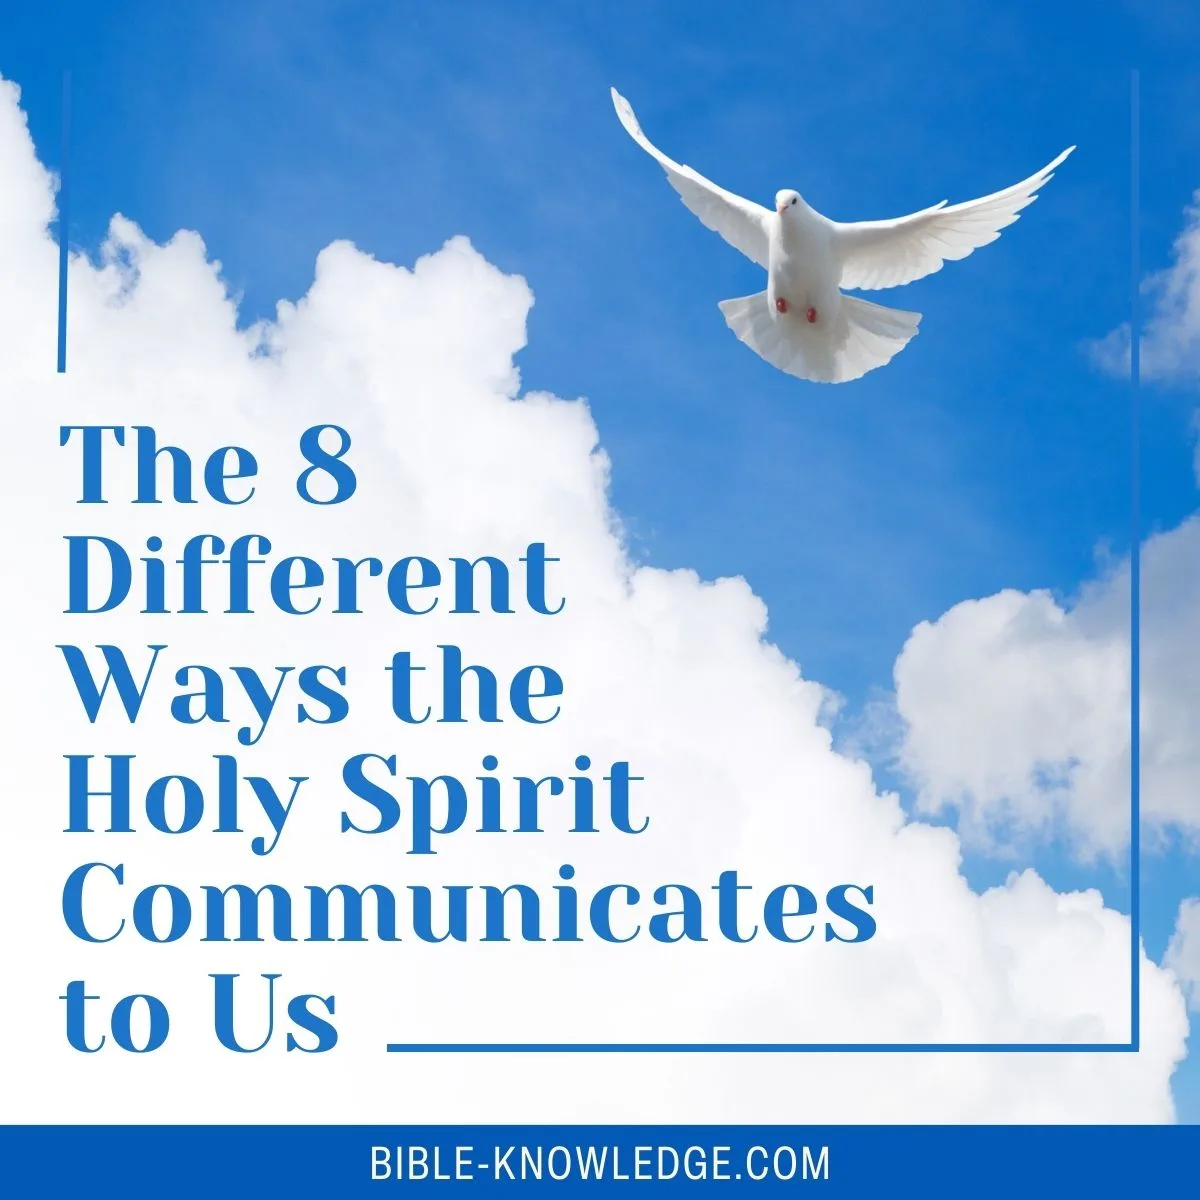 The 8 Different Ways the Holy Spirit Will Use to Communicate to Us